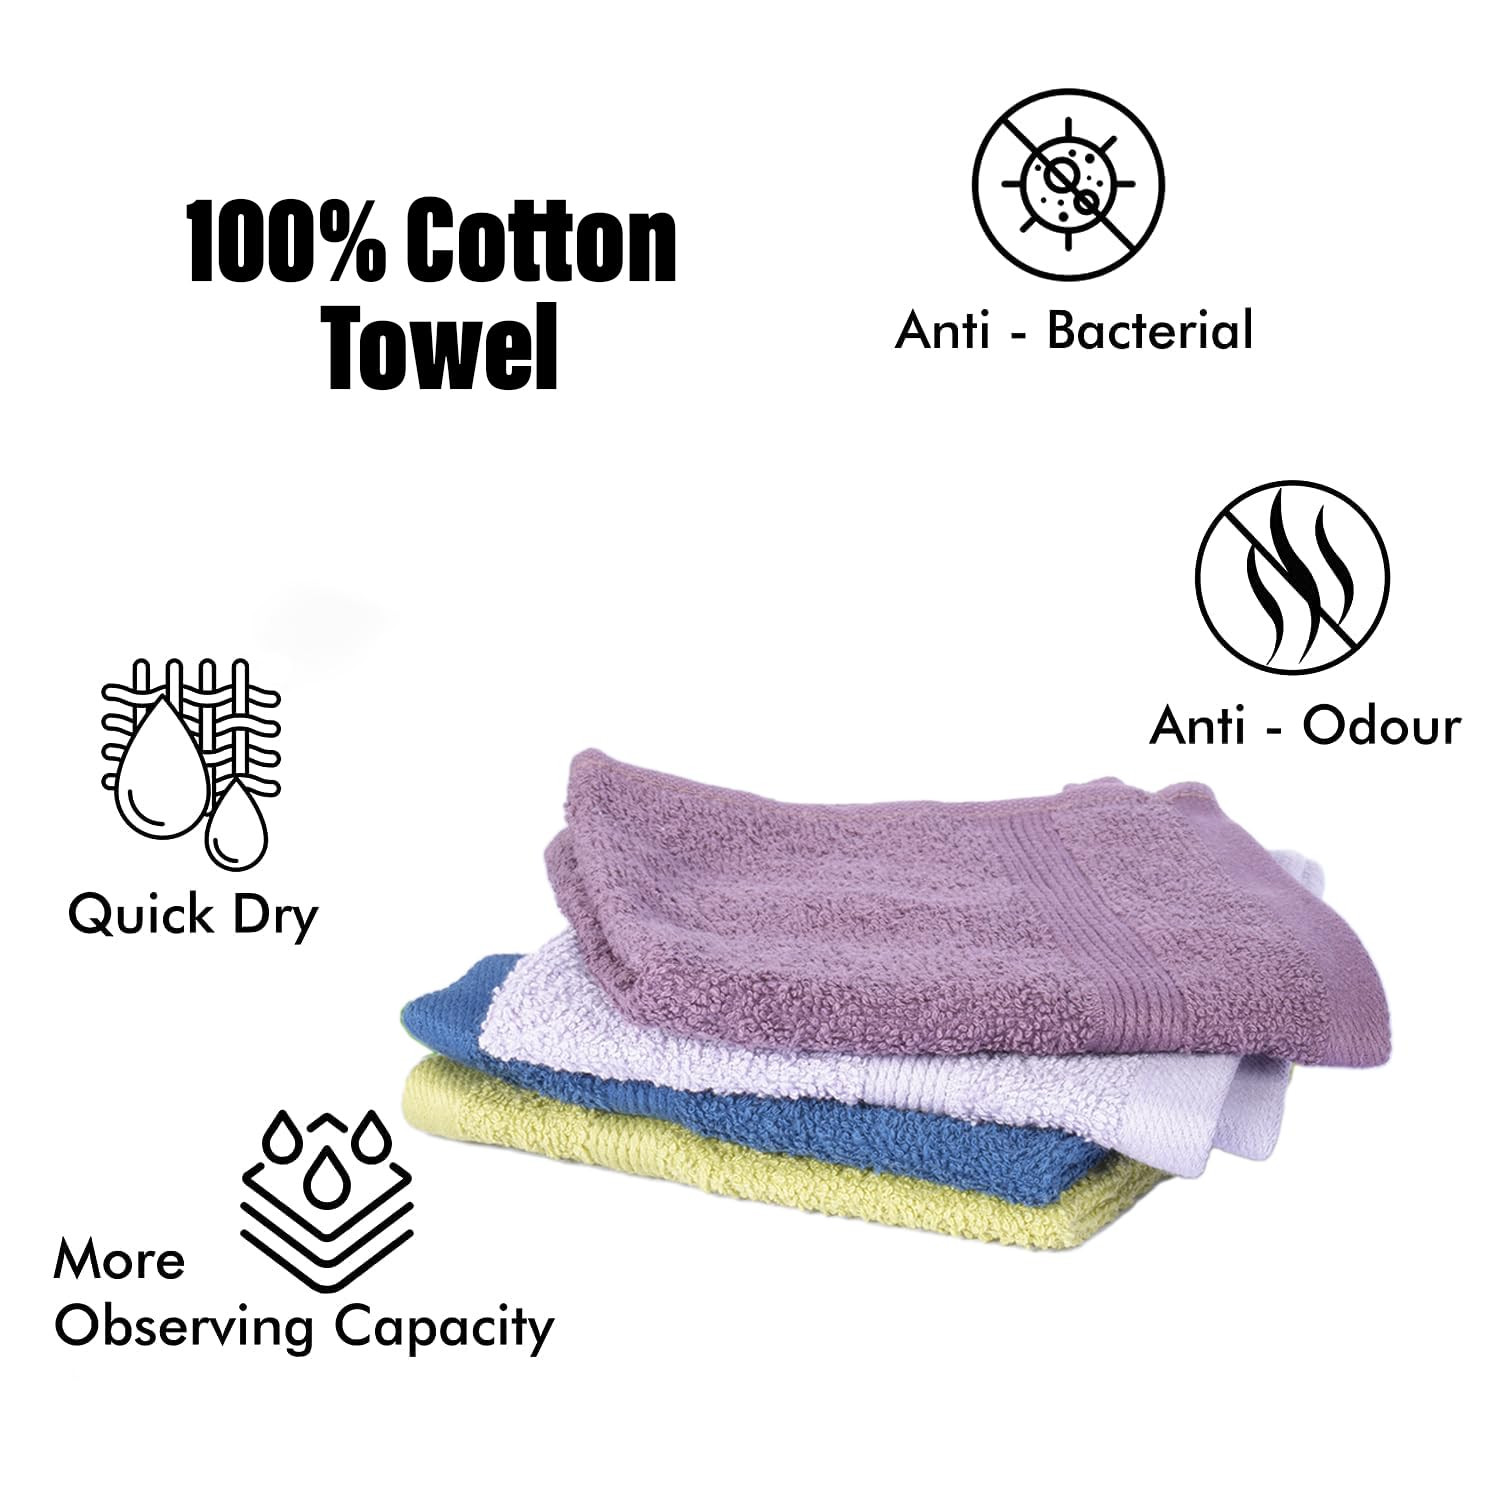 Kuber Industries 525 GSM Cotton Face towels |Super Soft, Quick Absorbent & Anti-Bacterial|Gym & Workout Towels|Pack of 4 (Multi)